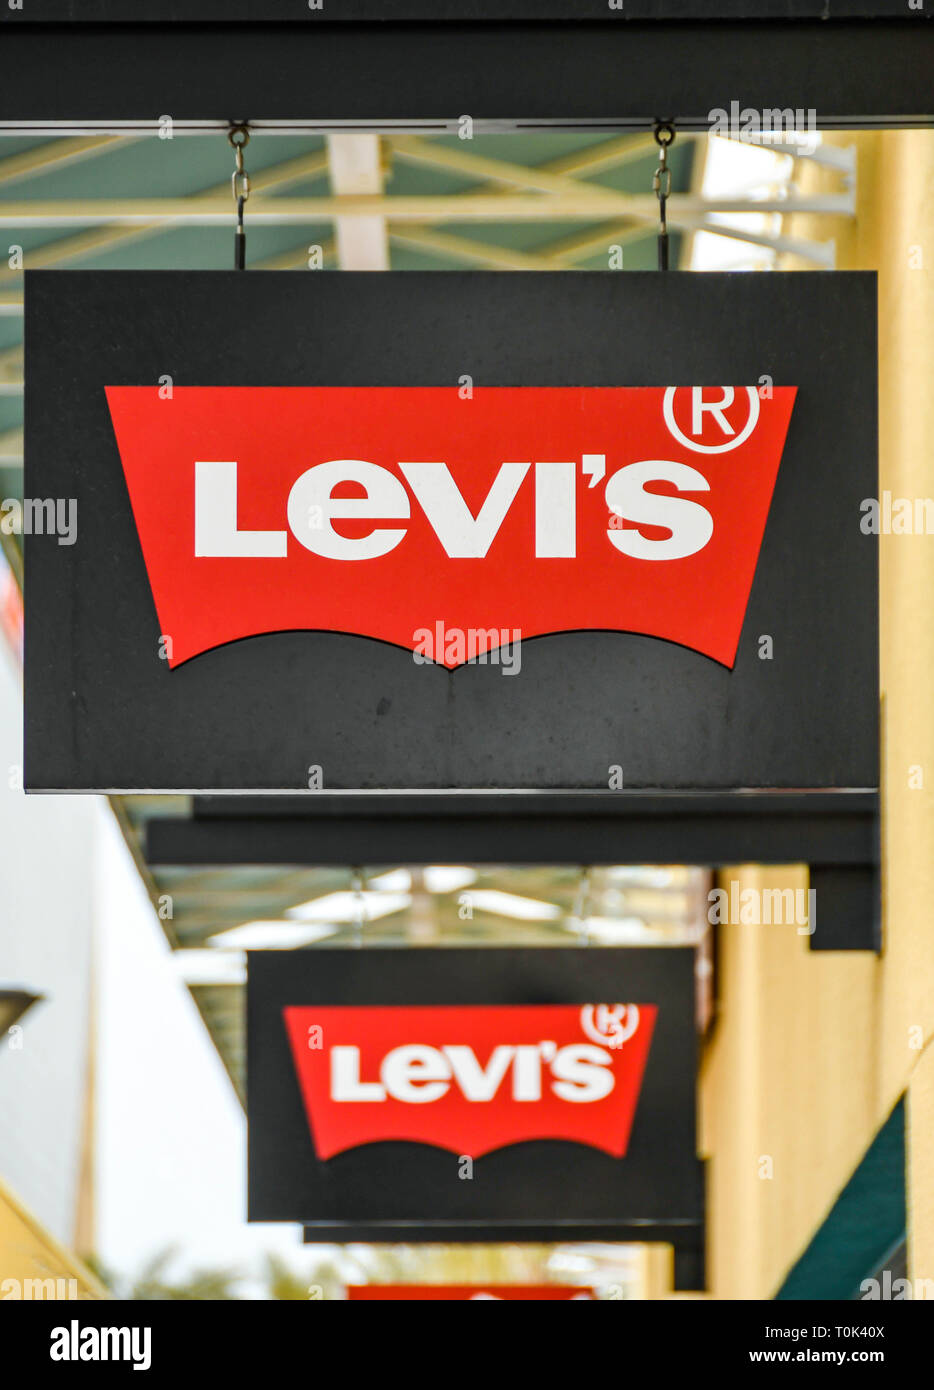 LAS VEGAS, NV, USA - FEBRUARY 2019: Sign above the entrance to the Zadig &  Voltaire store in the Premium Outlets north in Las Vegas Stock Photo - Alamy